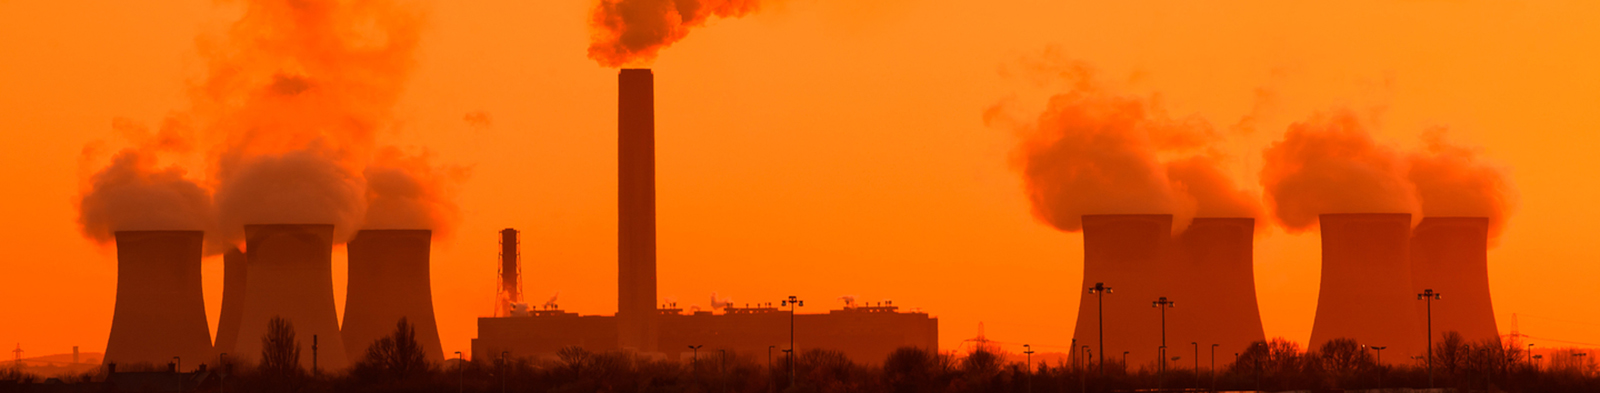 Coal station cooling towers with smoke coming out the chimney into orange sky